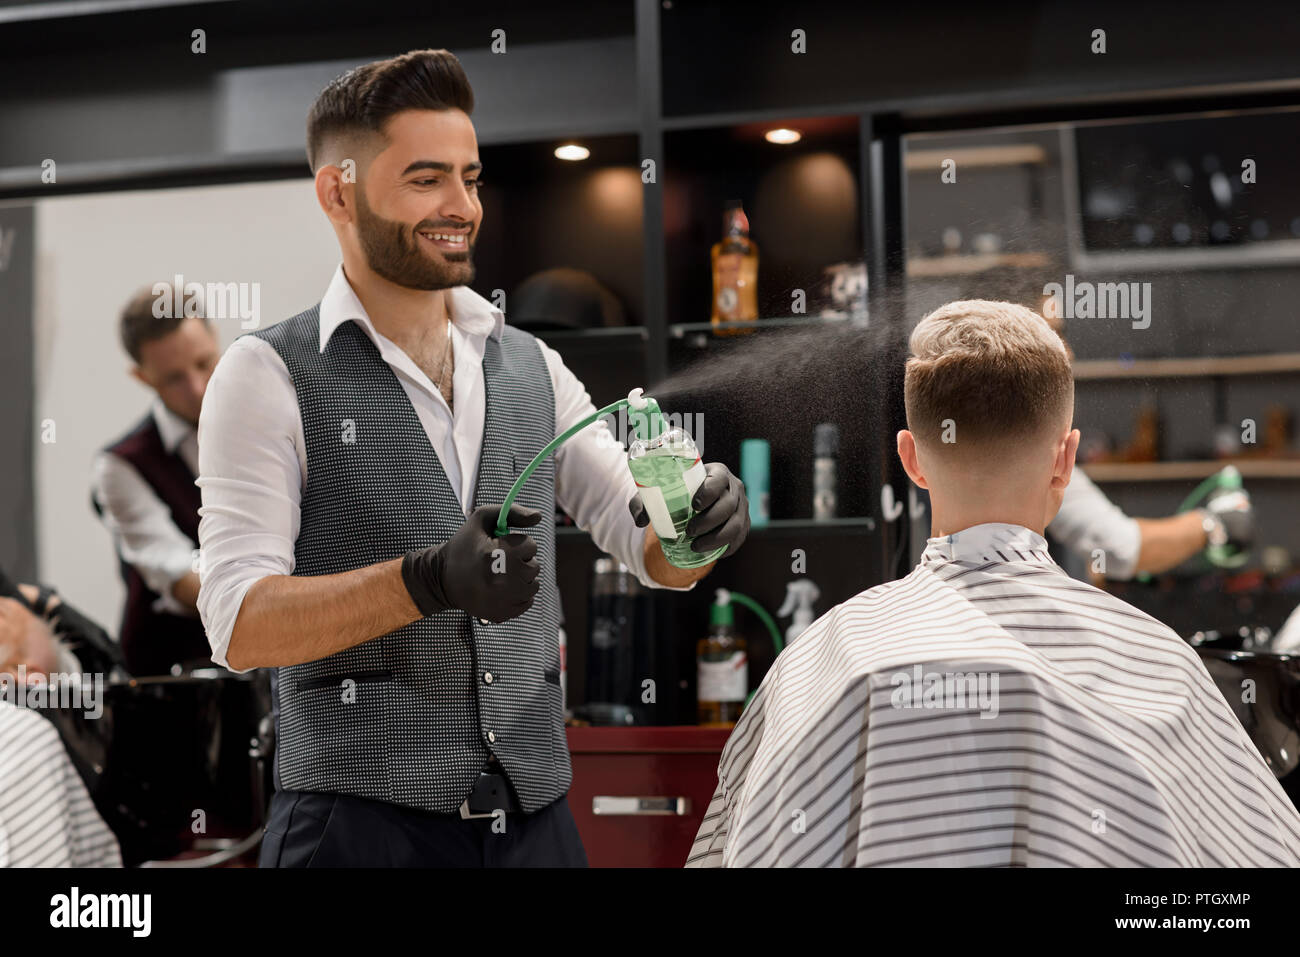 Smiling hairdresser sprinkling water on client's hair. Barber using sprayer bottle with green liquid. Master wearing classic white shirt and grey vest, while client sitting in striped haircut gown. Stock Photo